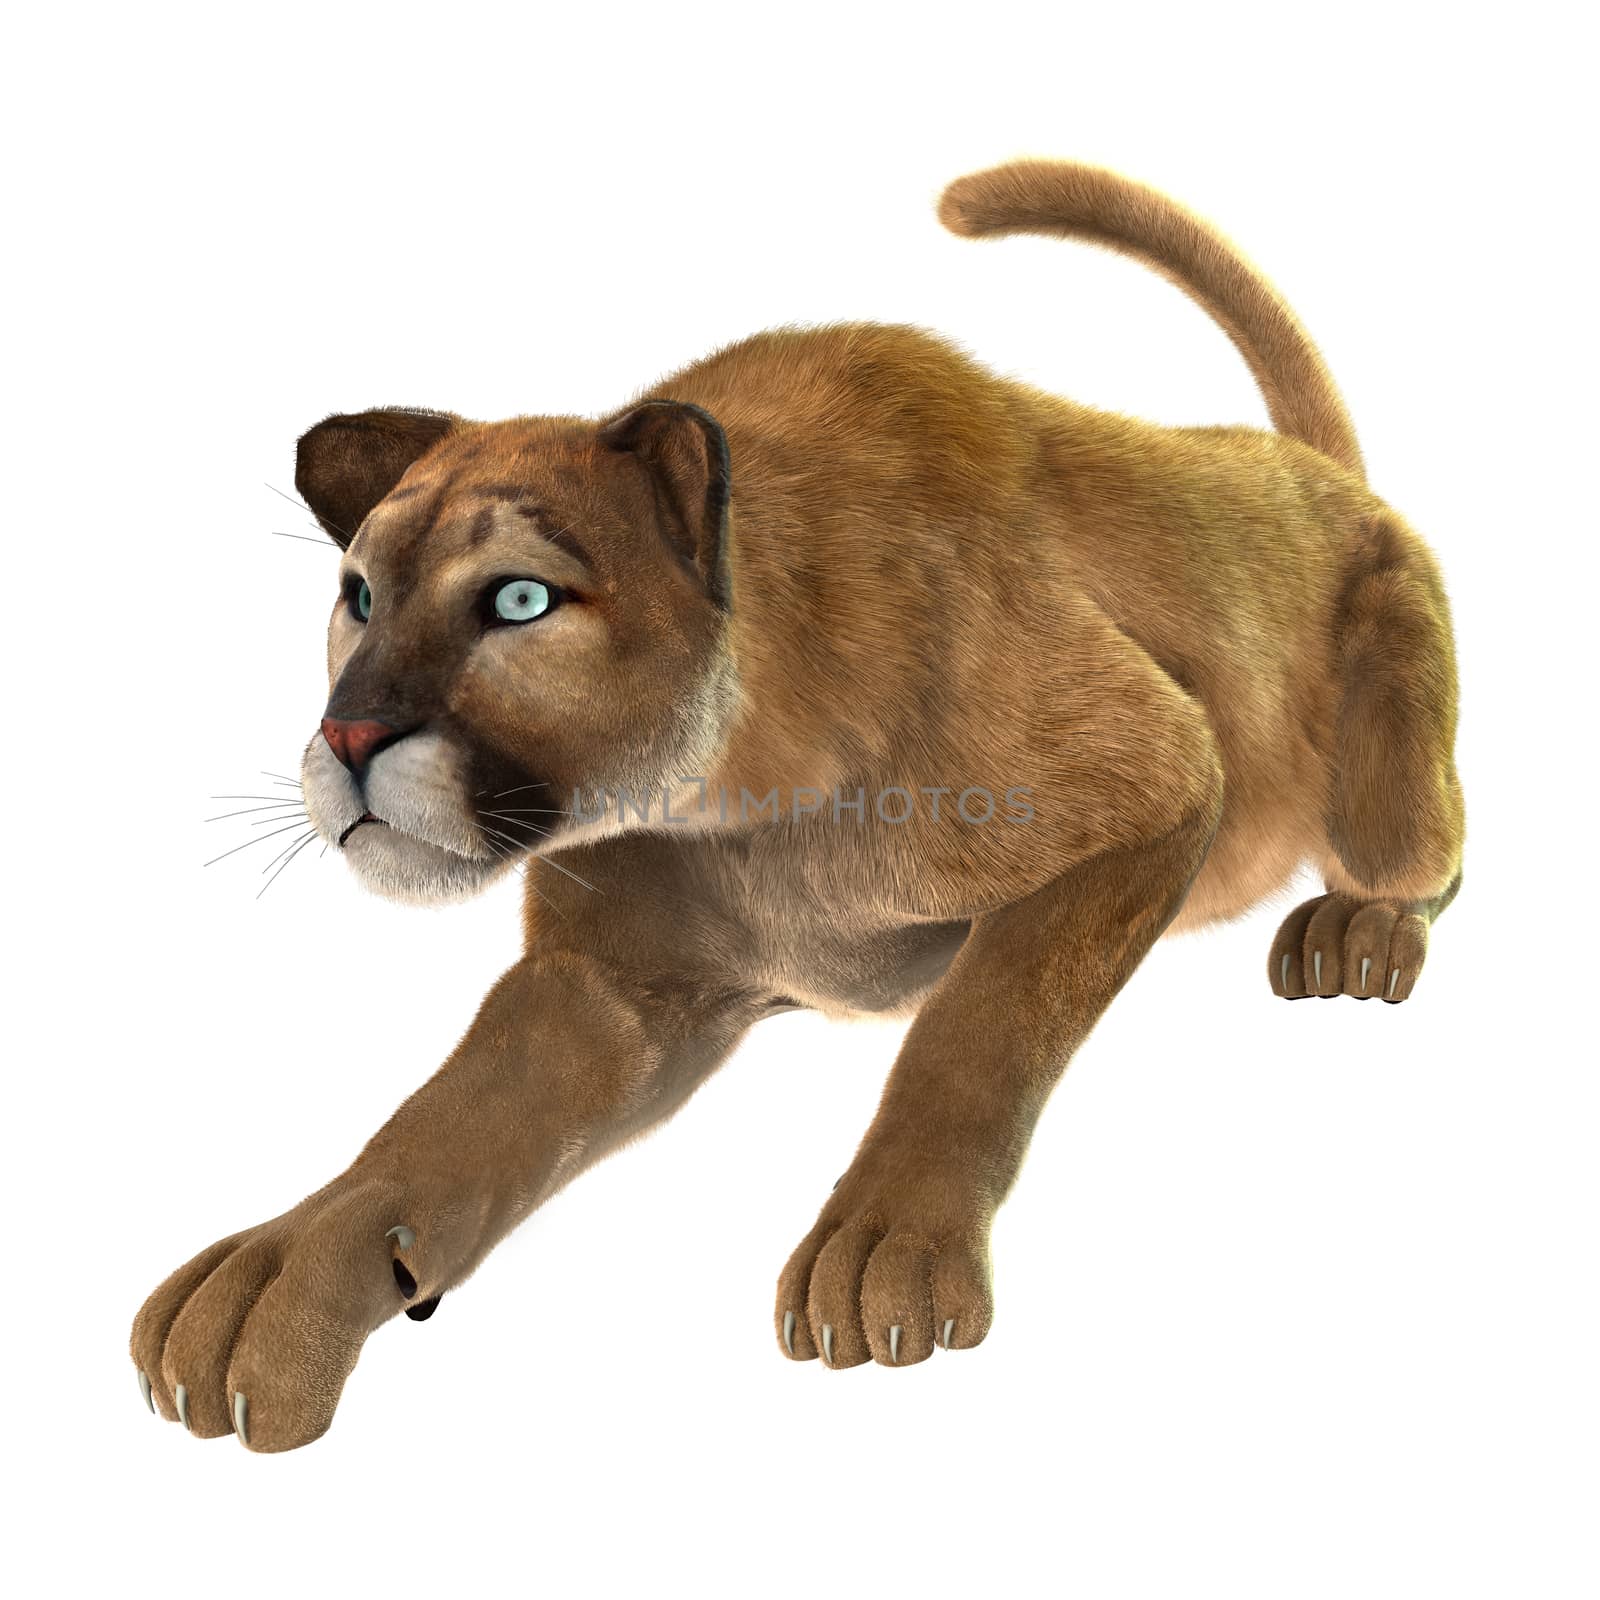 3D digital render of a big cat puma hunting isolated on white background